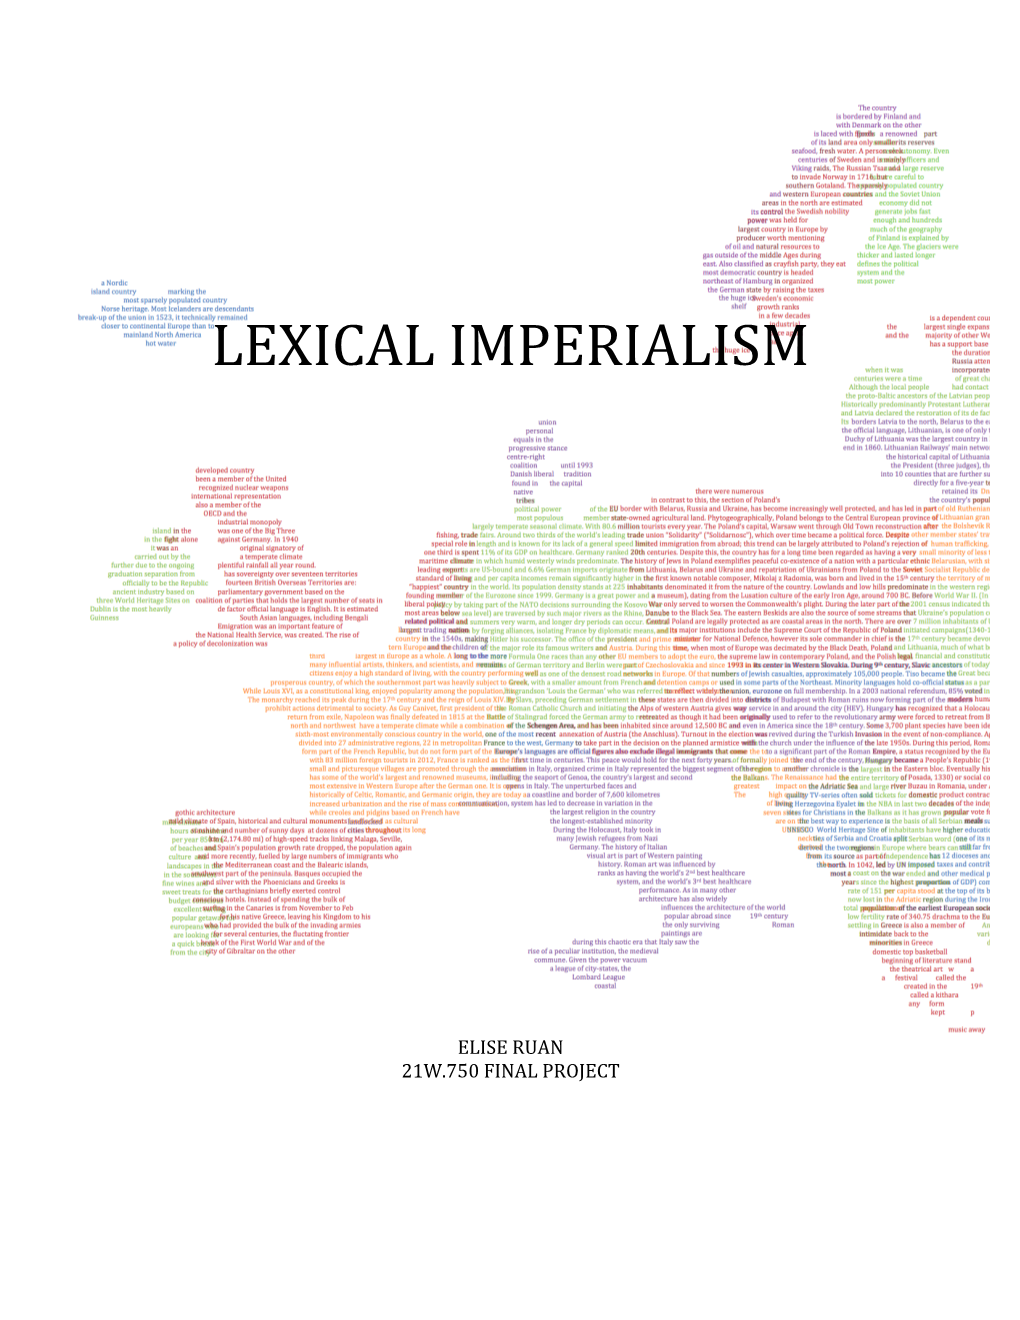 Lexical Imperialism